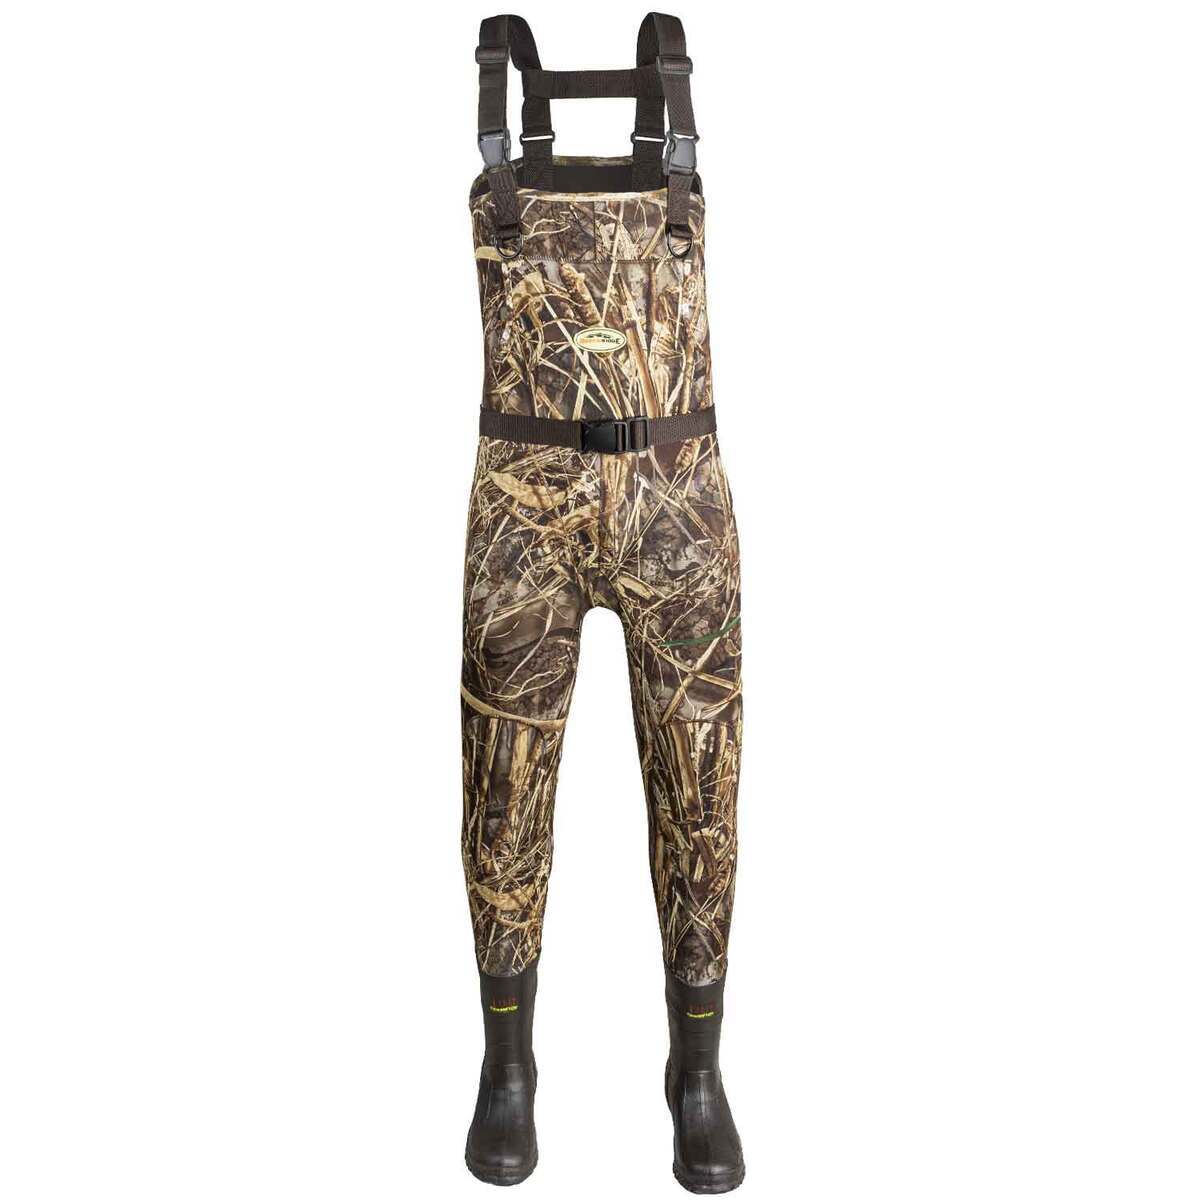 Dark Lightning Fly Fishing Waders for Men and Women with Boots, MensWomens  High Chest Wader with Boot Hanger